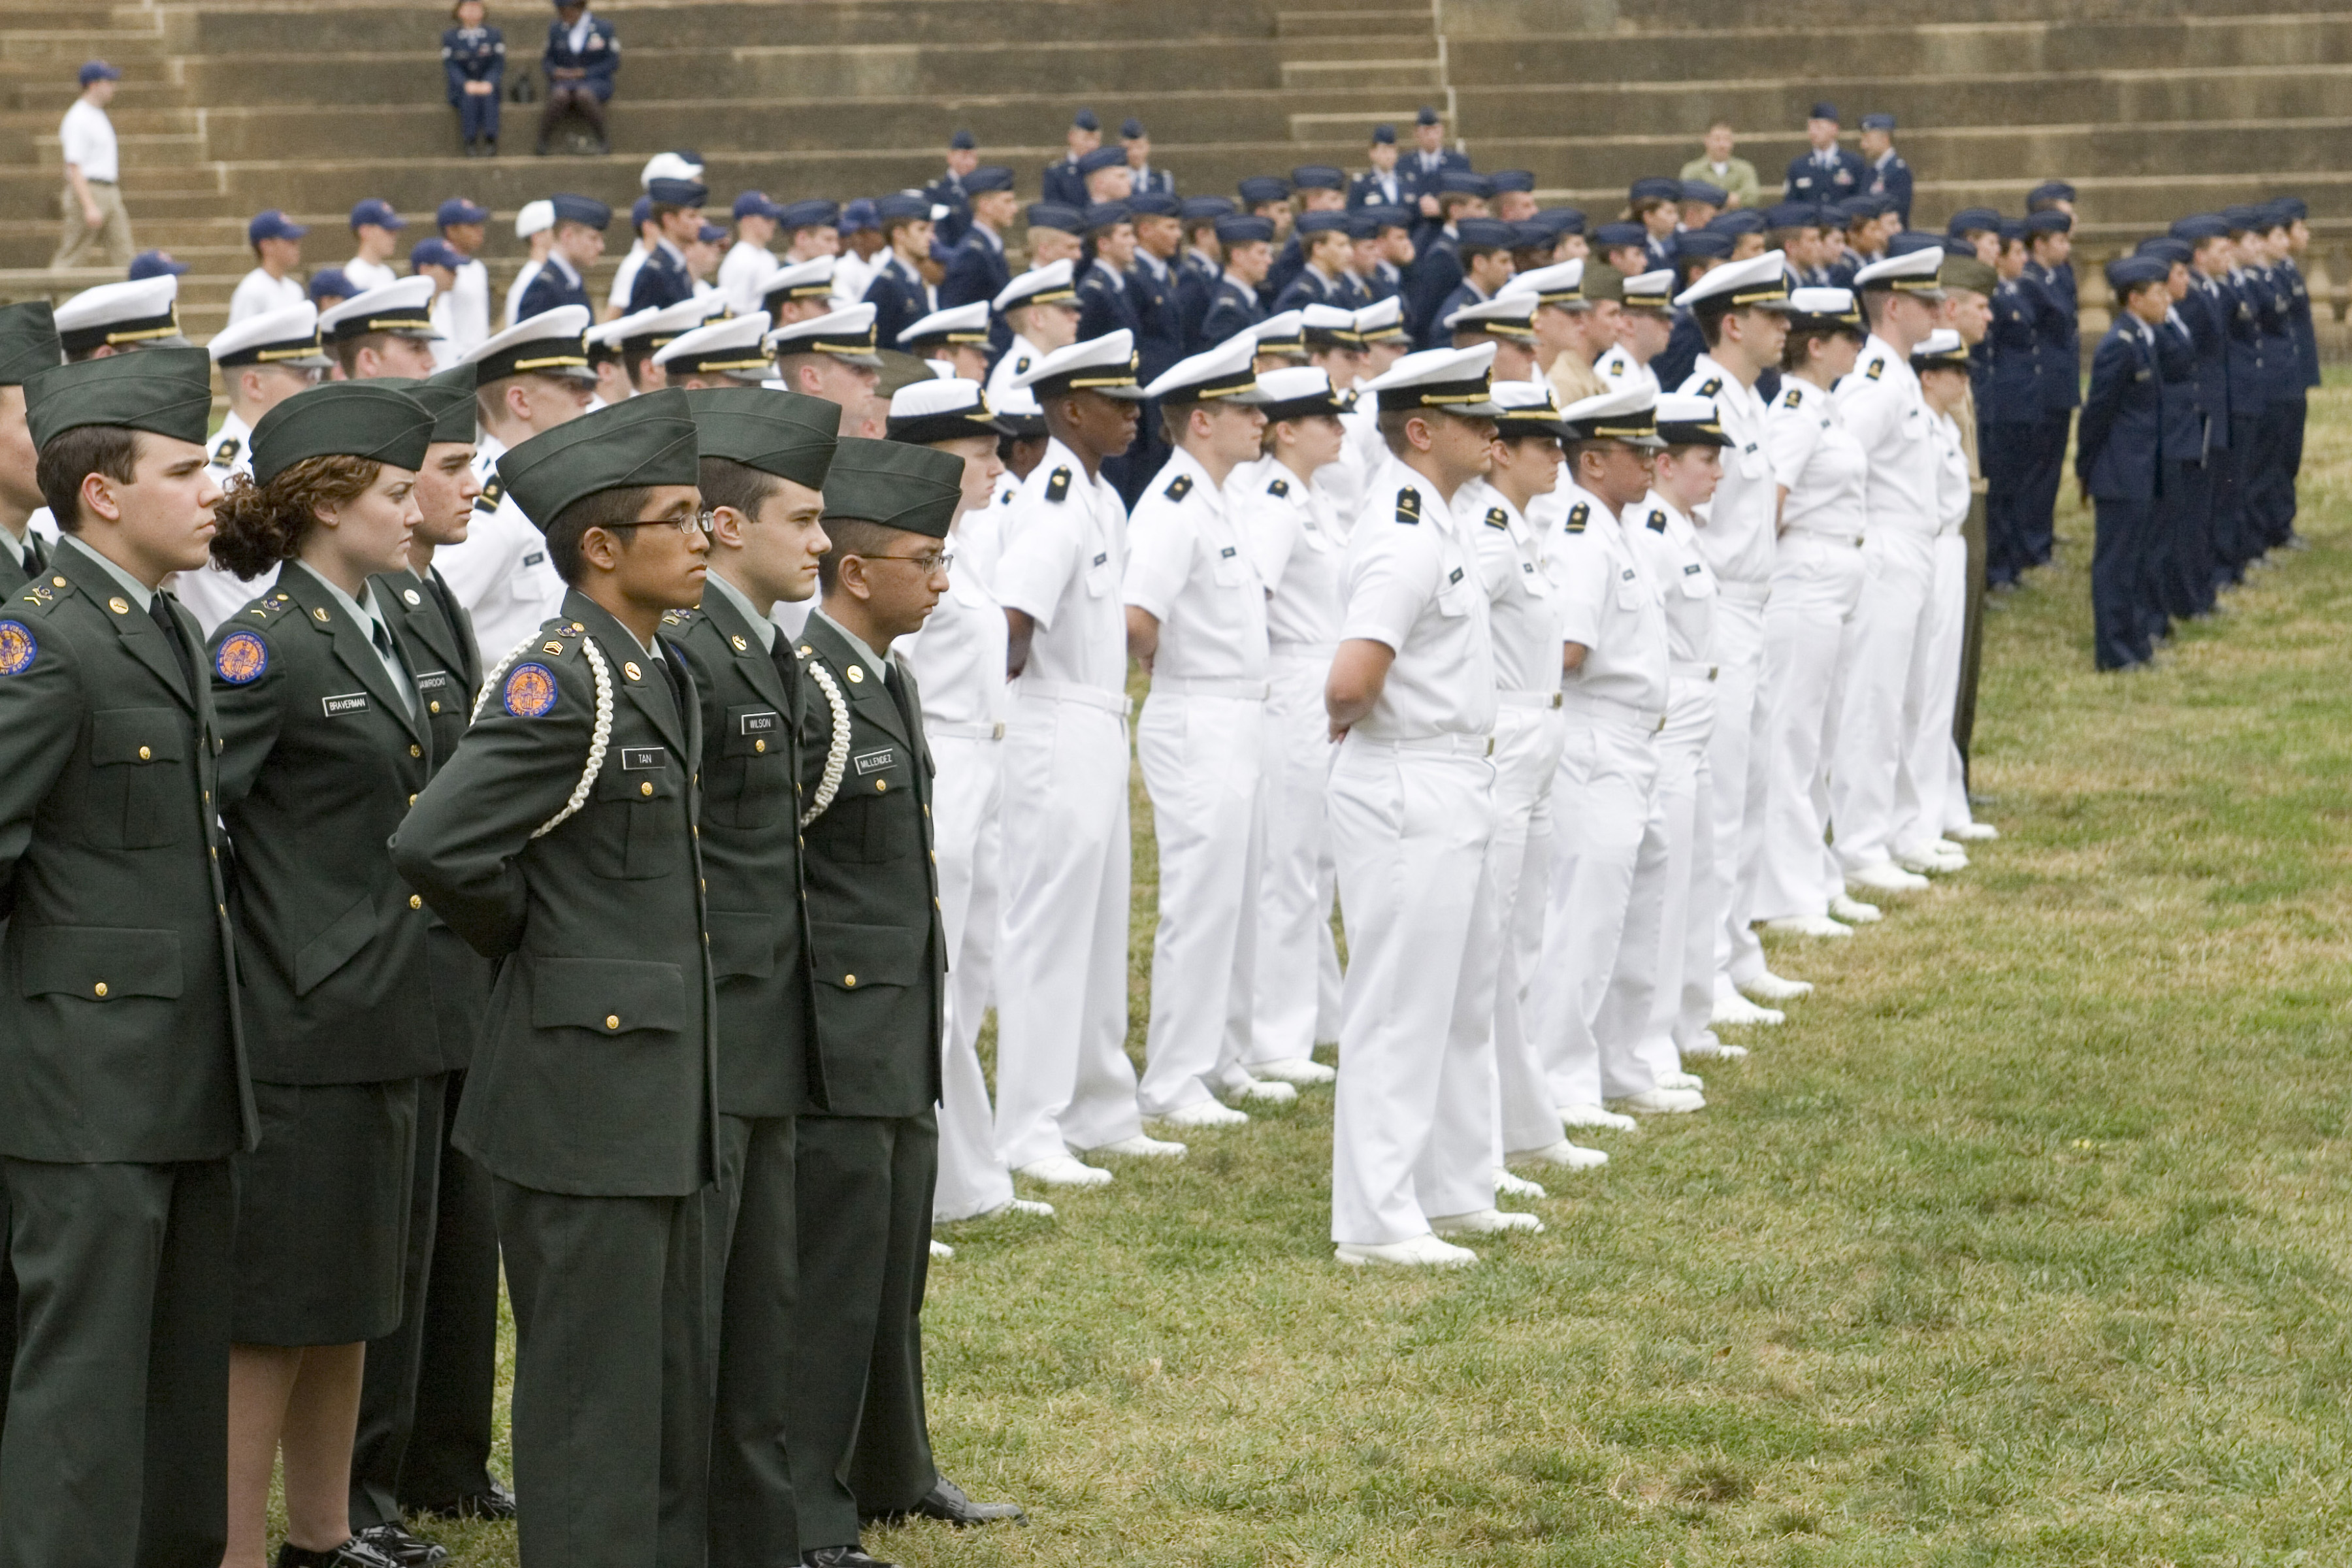 ROTC cadets in military dress uniforms from various branches stand during a ceremony to honor POWs, MIAs, and Veterans